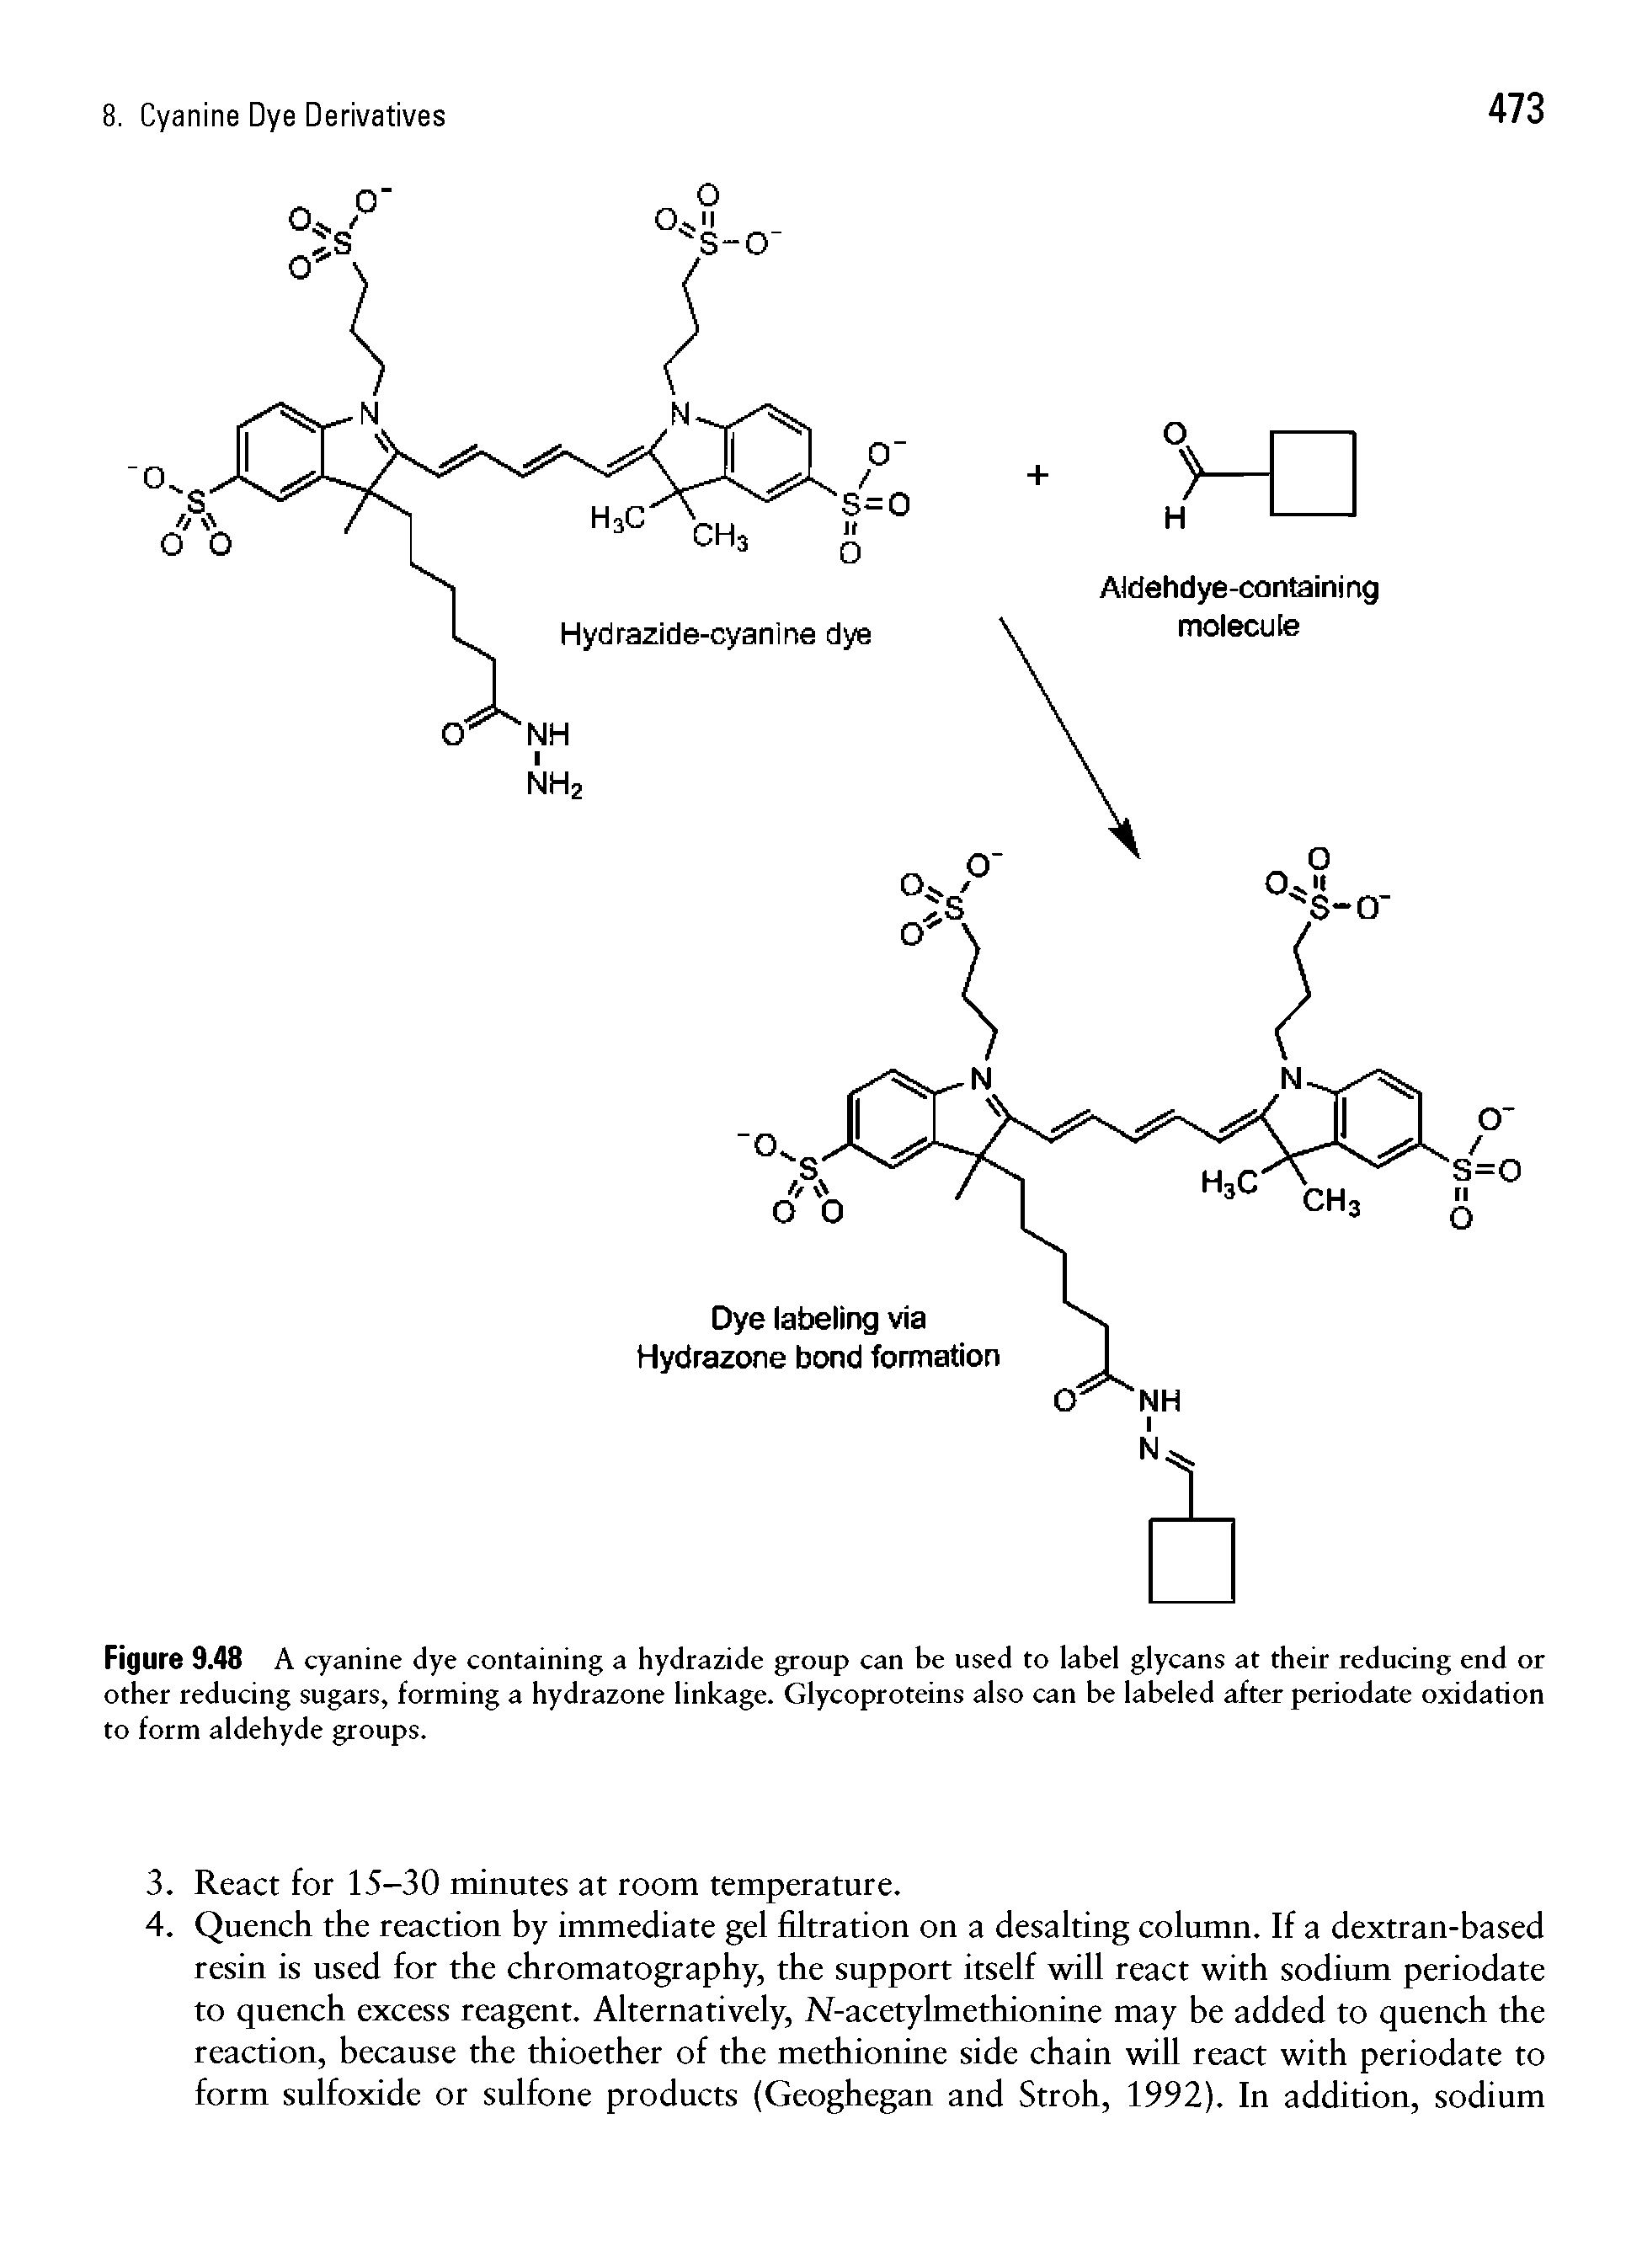 Figure 9.48 A cyanine dye containing a hydrazide group can be used to label glycans at their reducing end or other reducing sugars, forming a hydrazone linkage. Glycoproteins also can be labeled after periodate oxidation to form aldehyde groups.